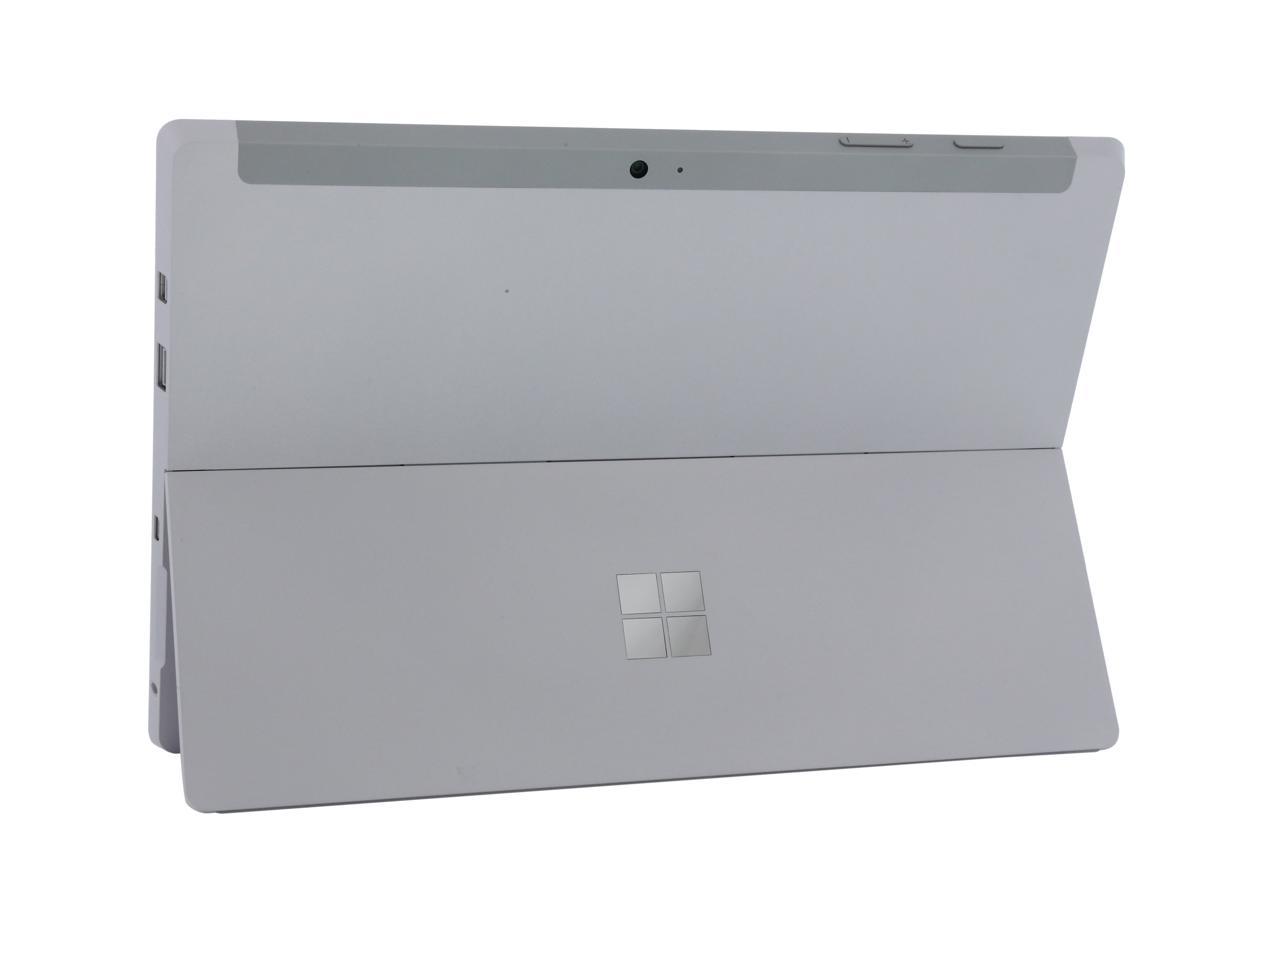 Back&Side Body Sticker Skin Decal Cover-Surface Pro 4/ Pro 2017-Brushed SIlver 